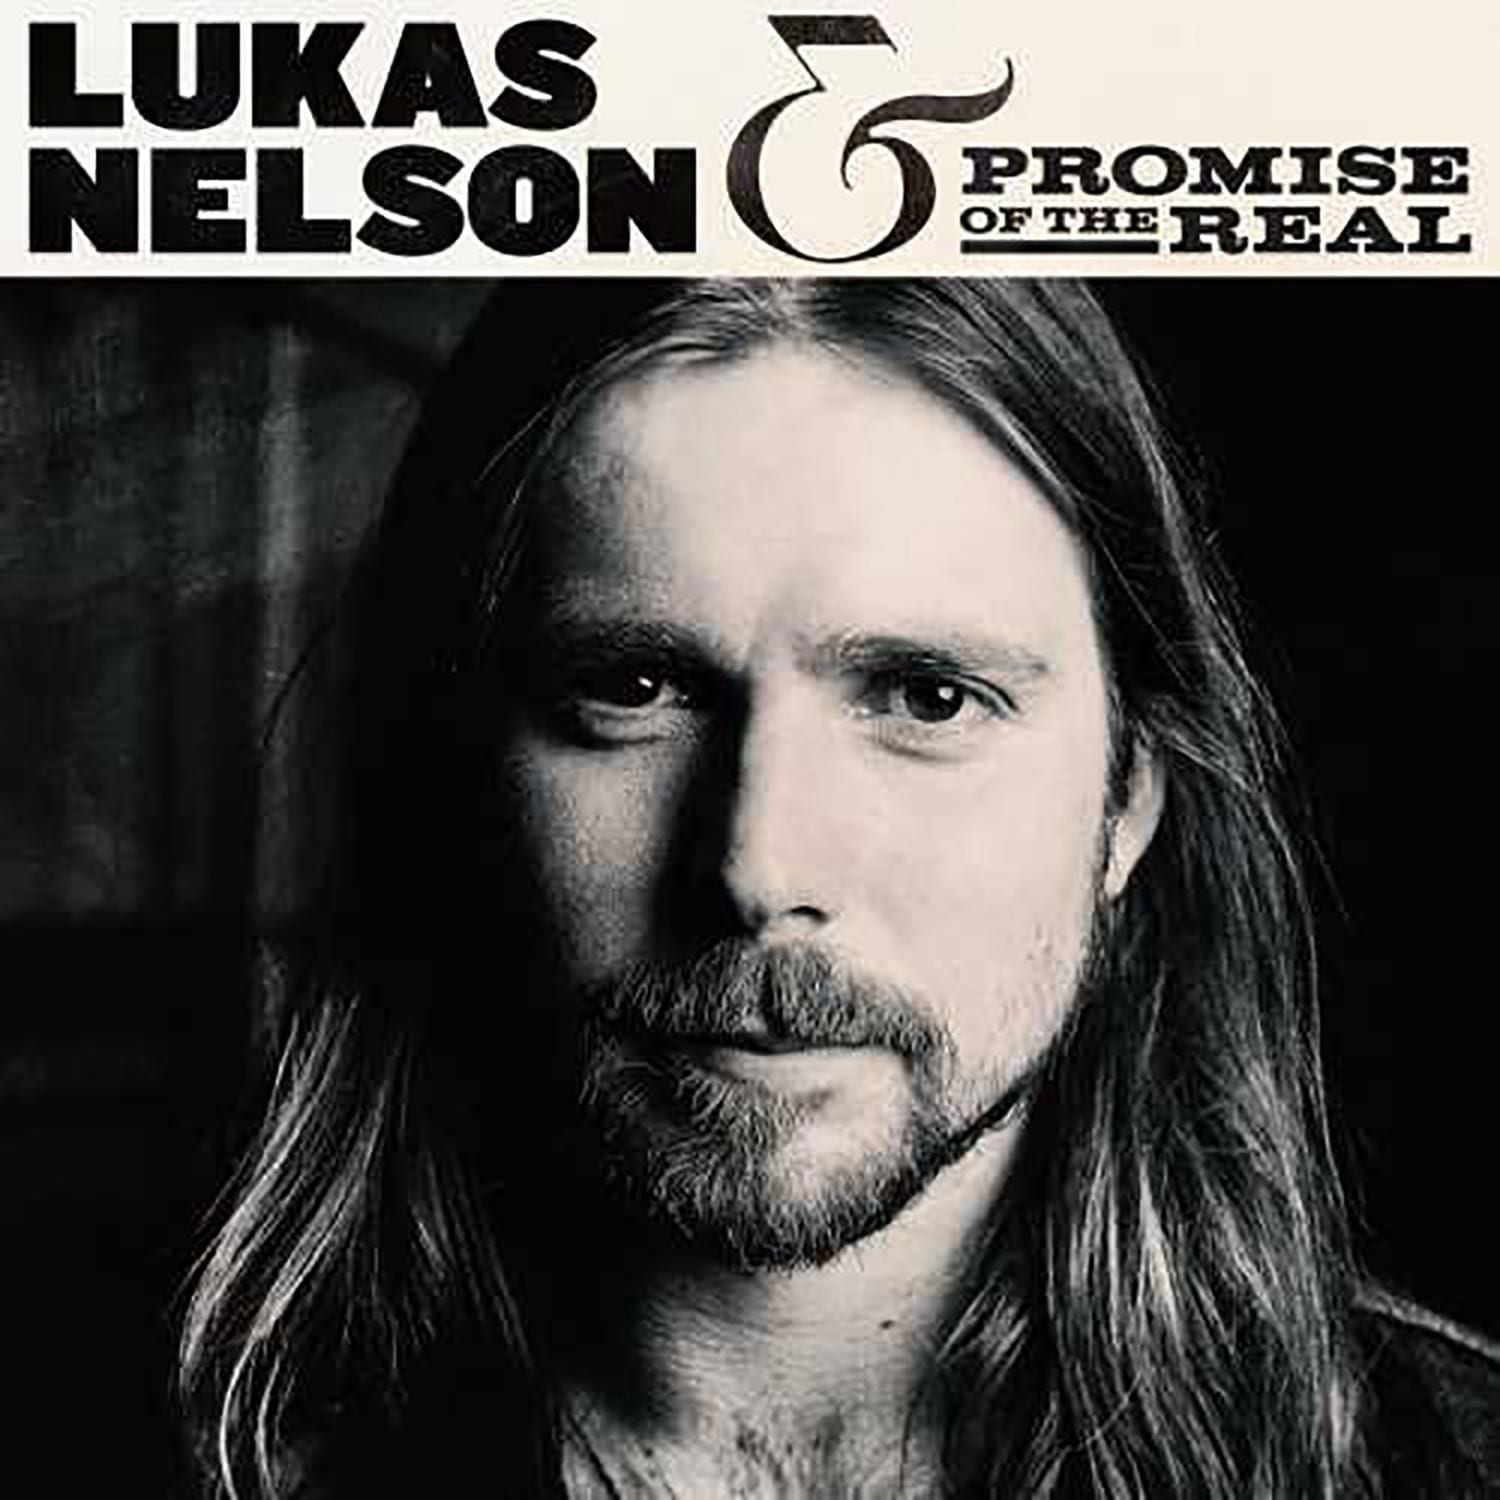 LUKAS NELSON AND PROMISE OF THE REAL